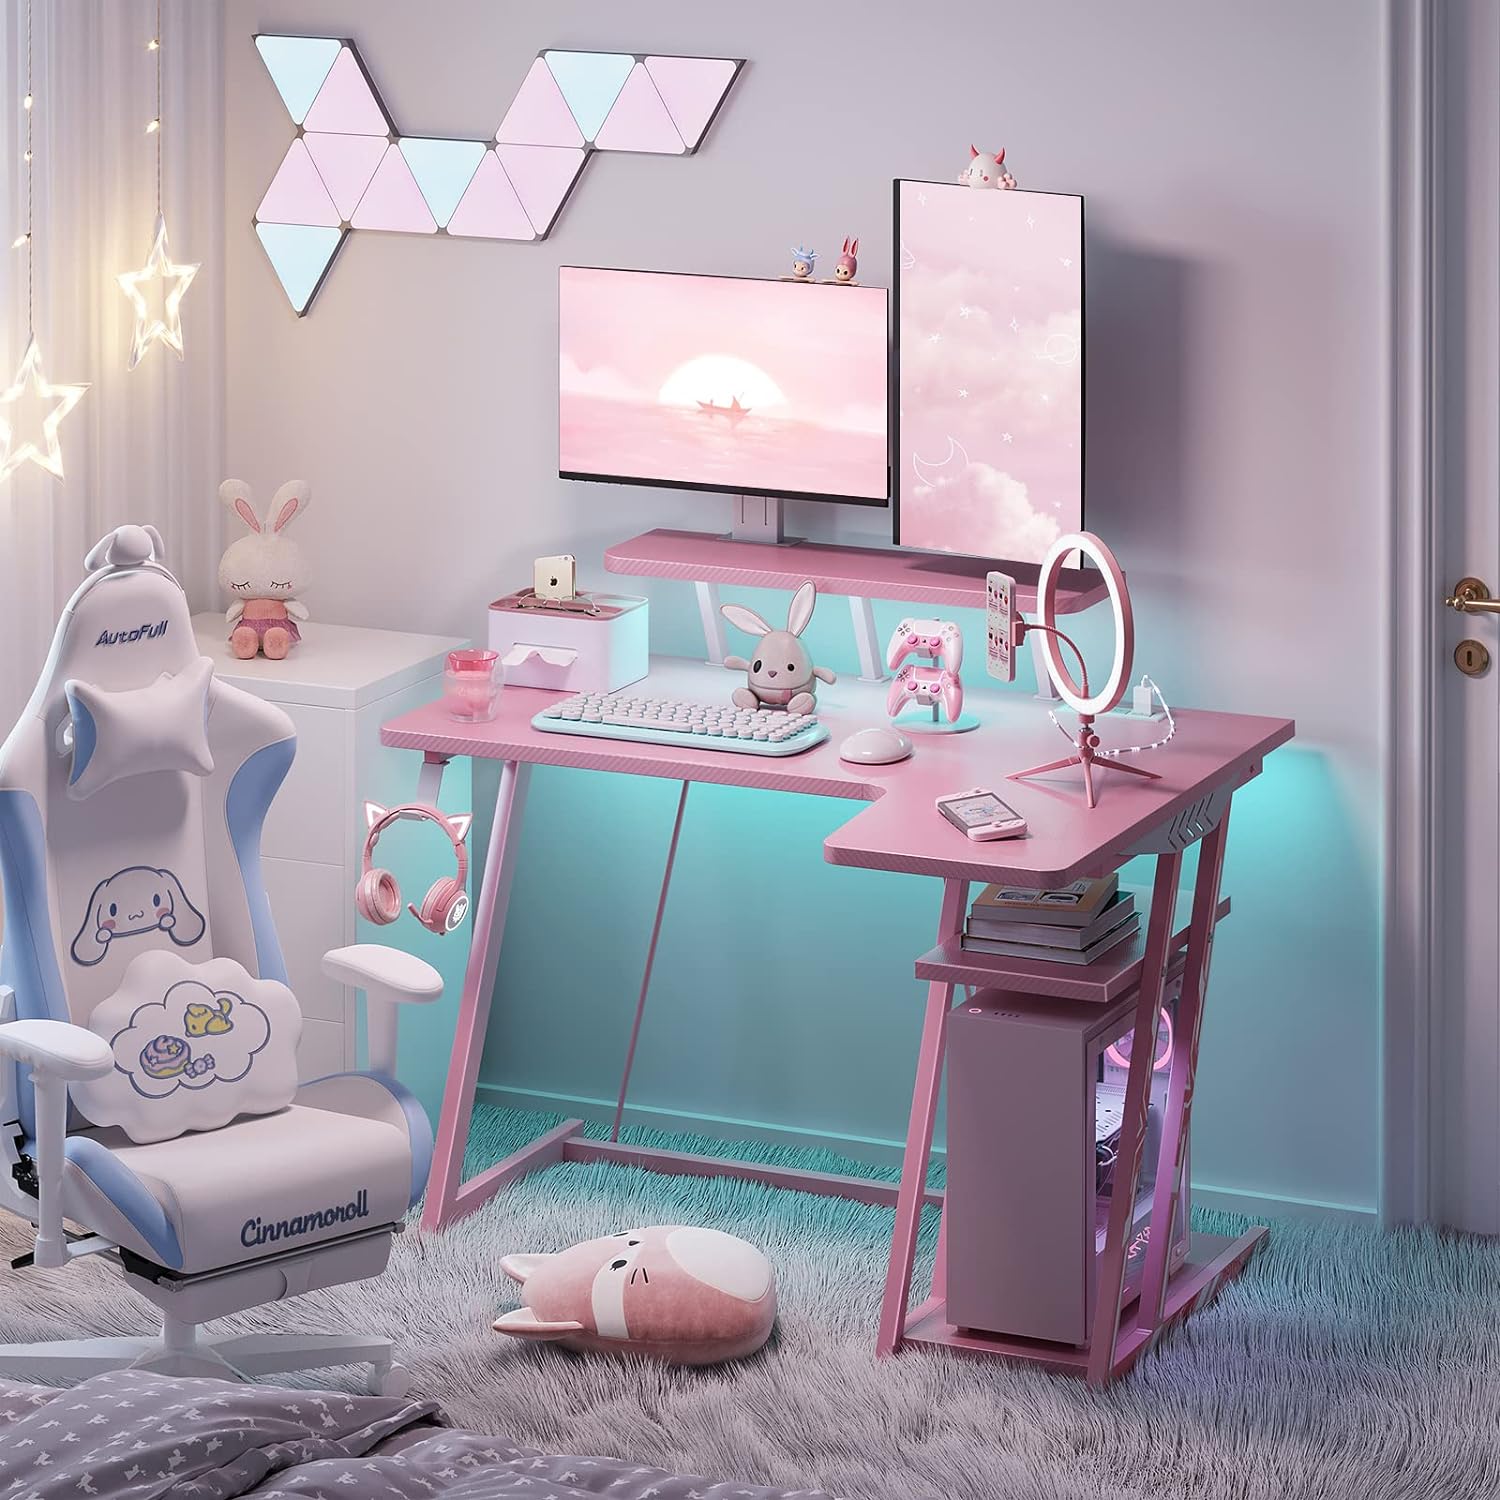 pink L shaped desk small space desks for gamers cute pink desks for sale online small space bedroom gaming setup inspiration pink and white decor for gamer girl study space ideas